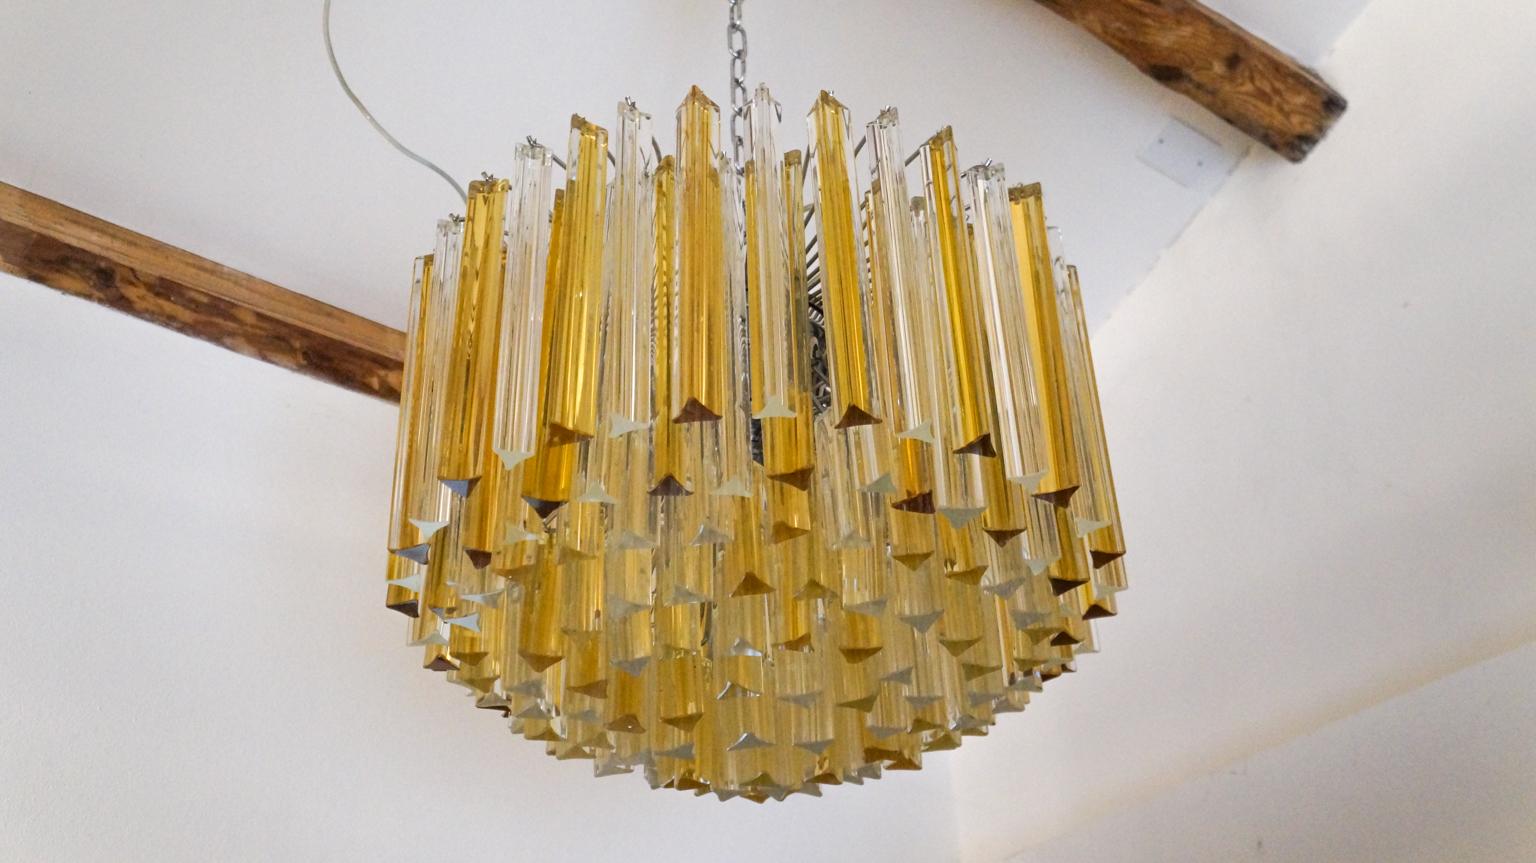 Murano blown glass chandelier with 157 elements in crystal and amber, nickel finish structure and six lights E26 / E27.
This fantastic work has 72 elements of cm 28 (inches 11,08) plus 85 elements of 10 cm (inches 3,93).
The elements of this